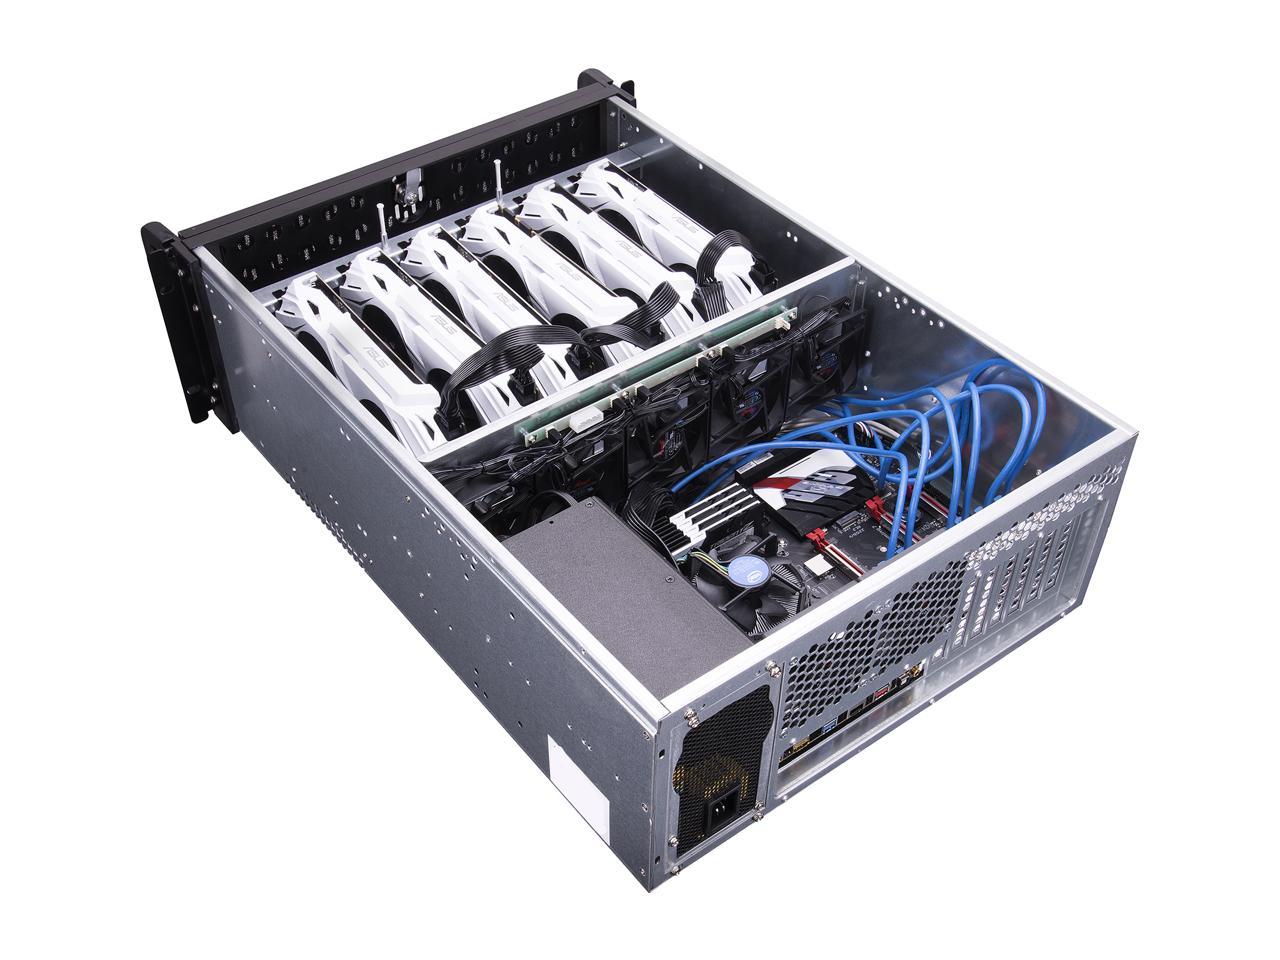 Rosewill RSV-l4000 4u Rackmount Server Chassis